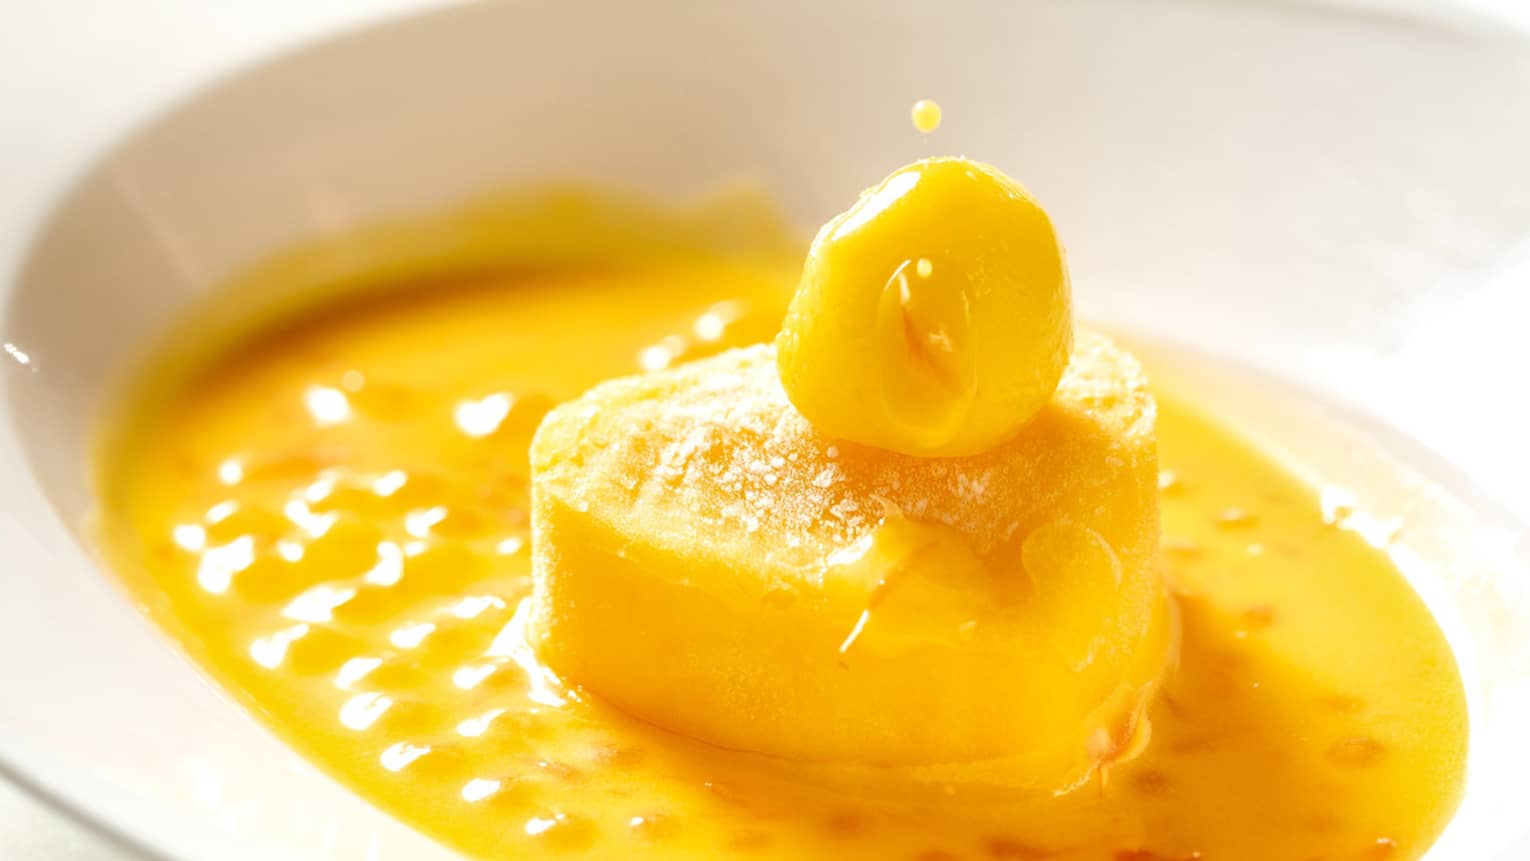 A white spoon drips yellow sauce onto a vibrant mango dessert served in a white dish